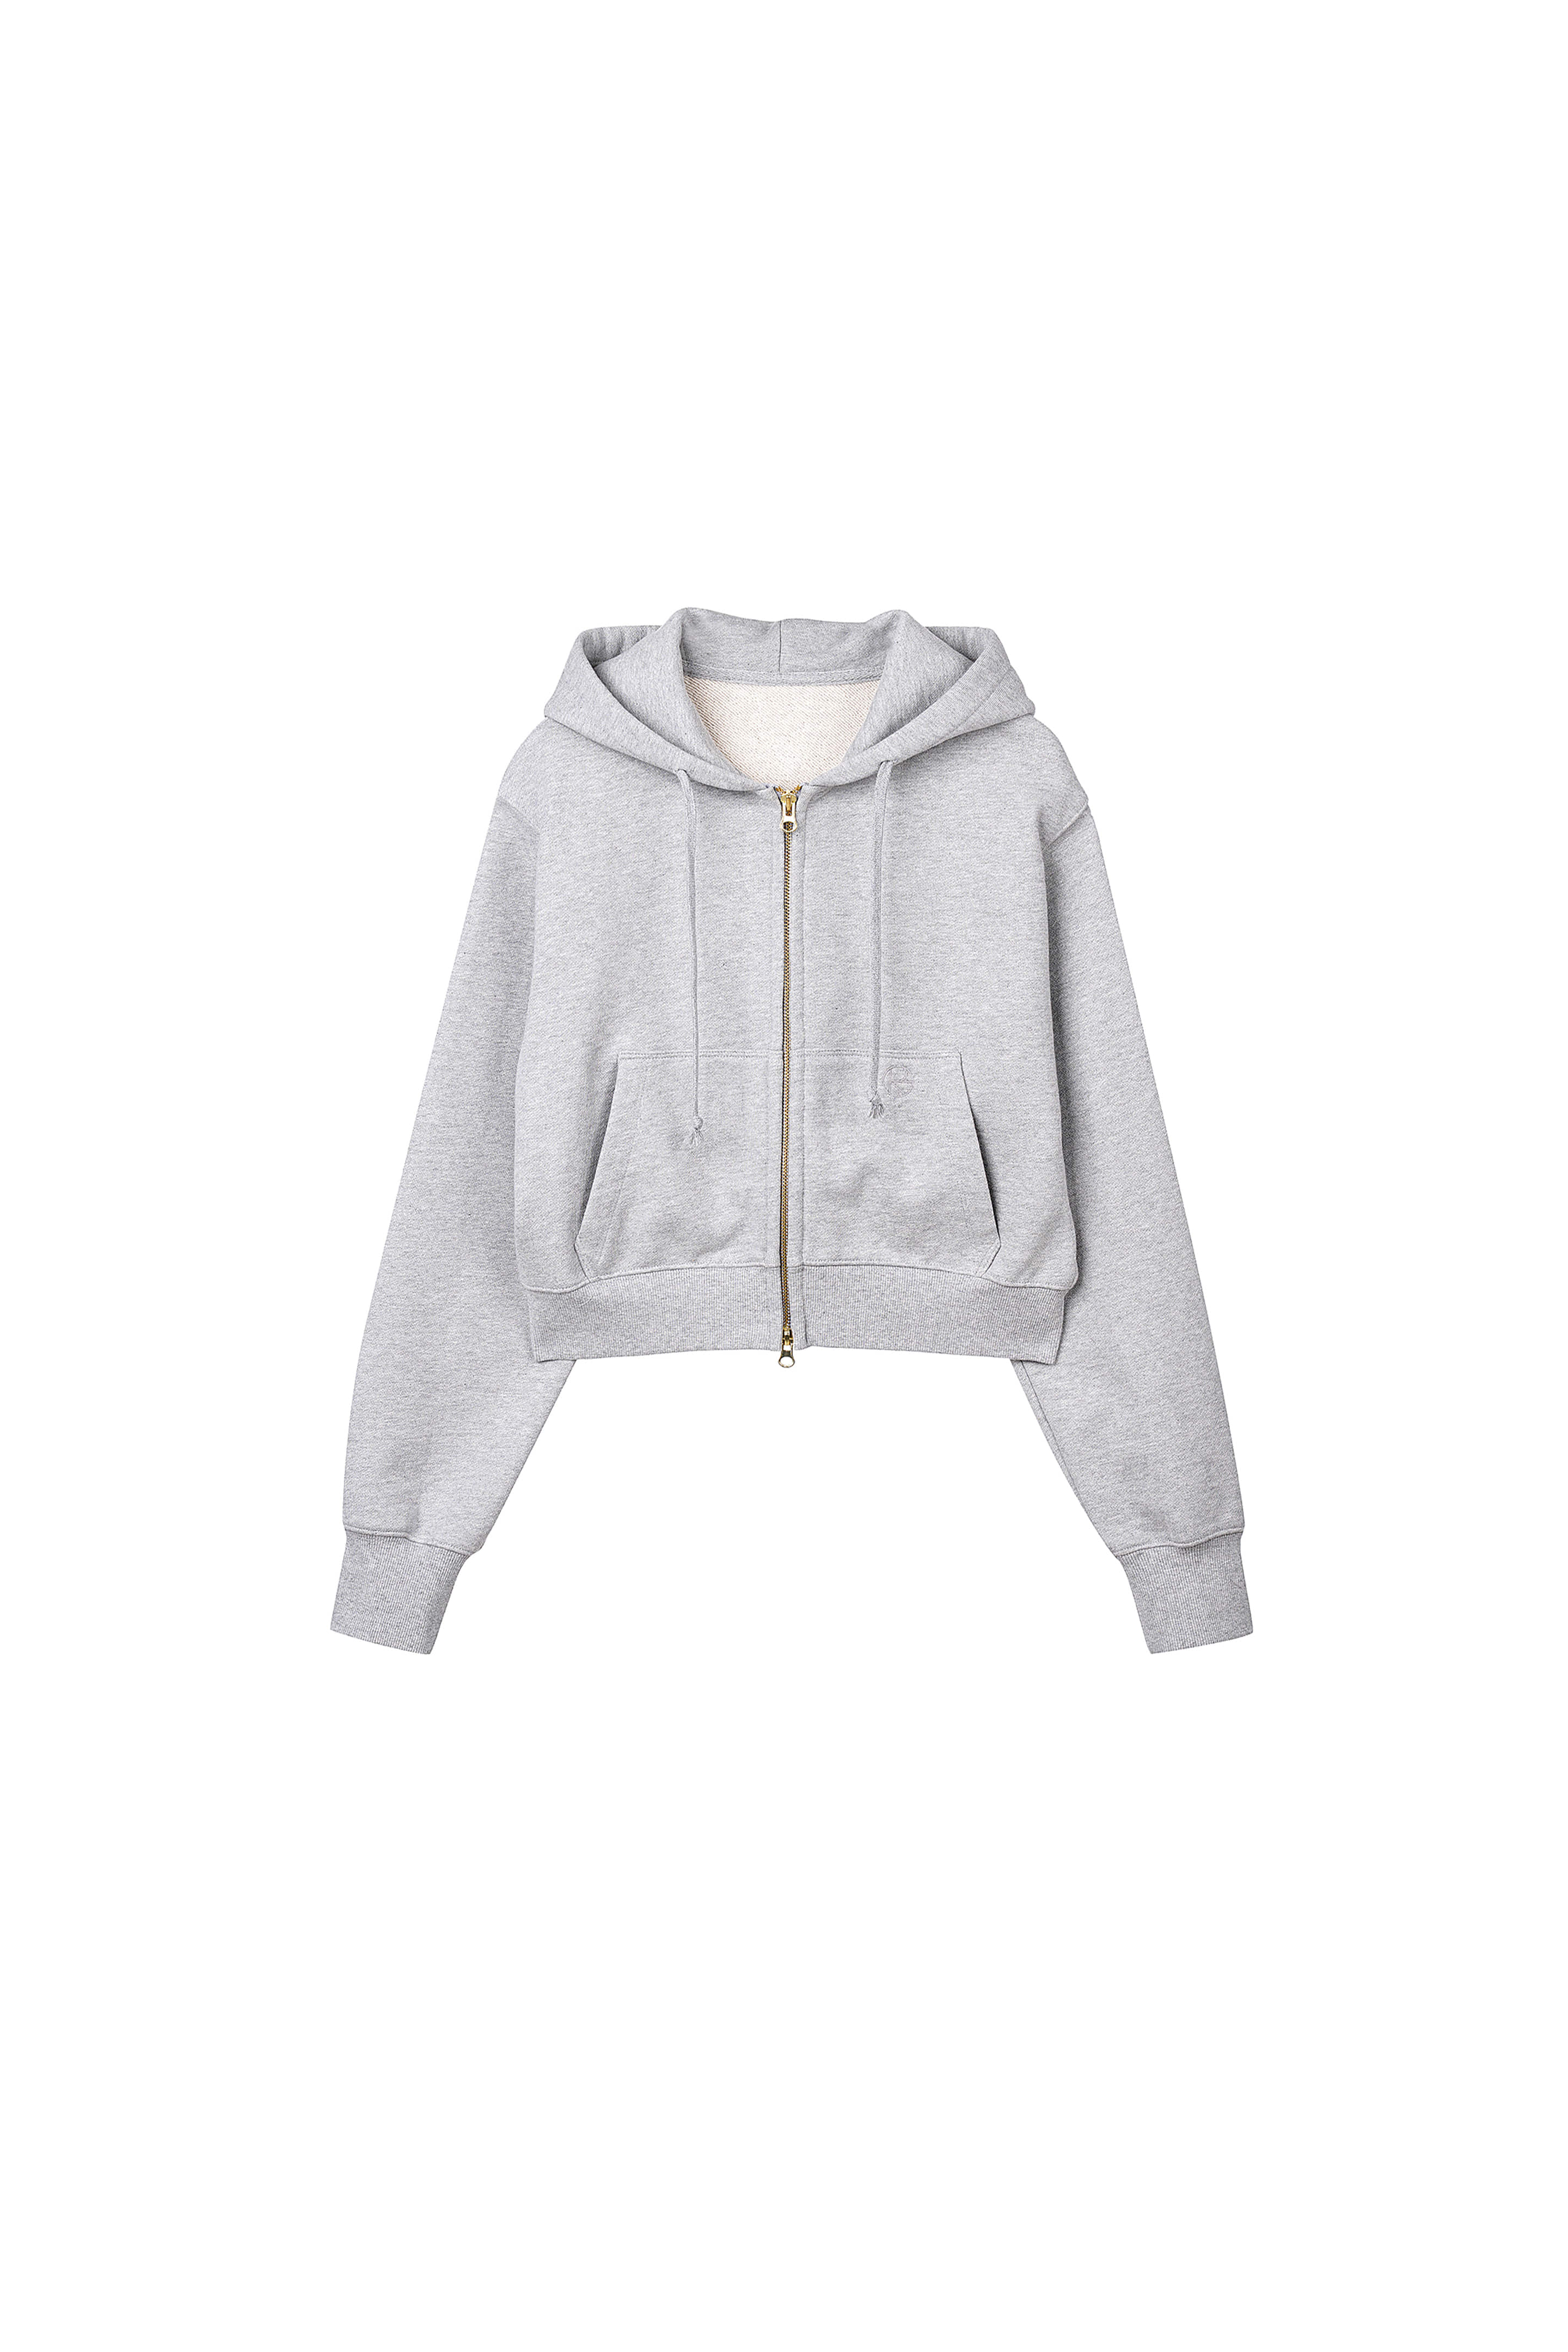 3rd) ORE COTTON 007 Cropped Hoodie Jumper M.Grey